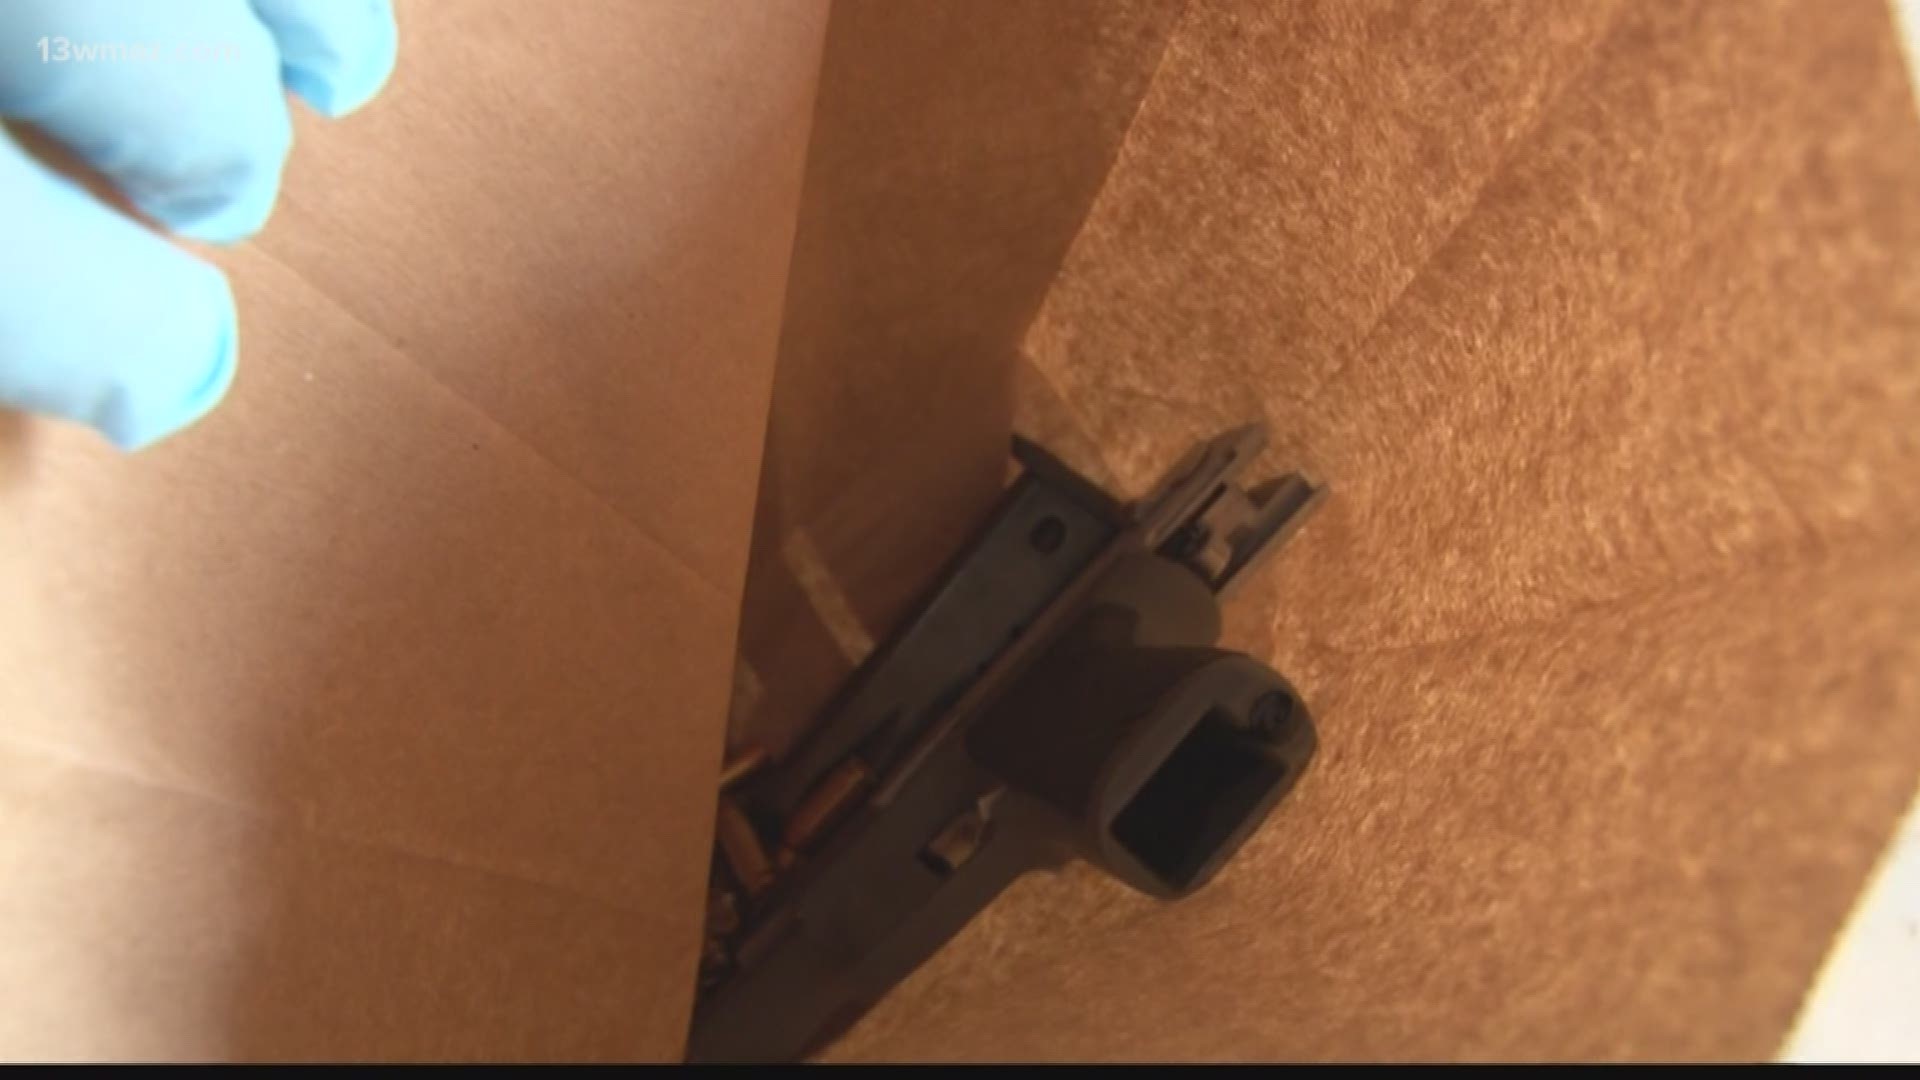 Warner Robins woman anonymously taking and turning in guns